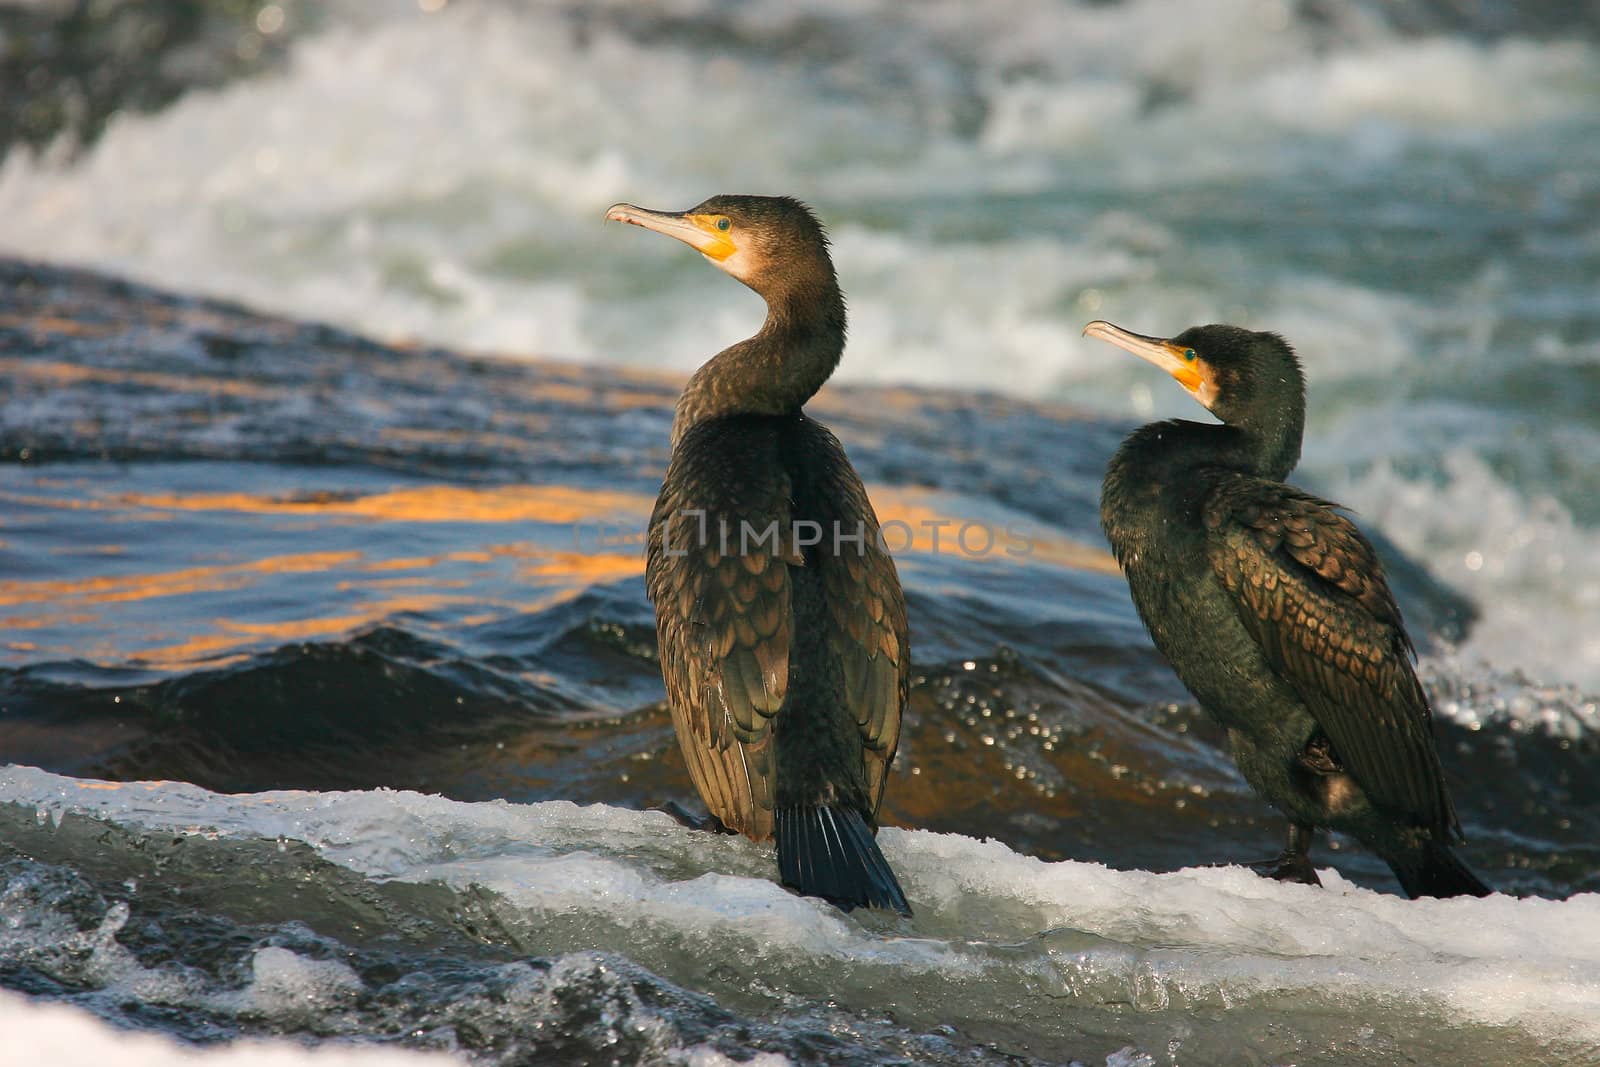 Black cormorants on the river in the morning